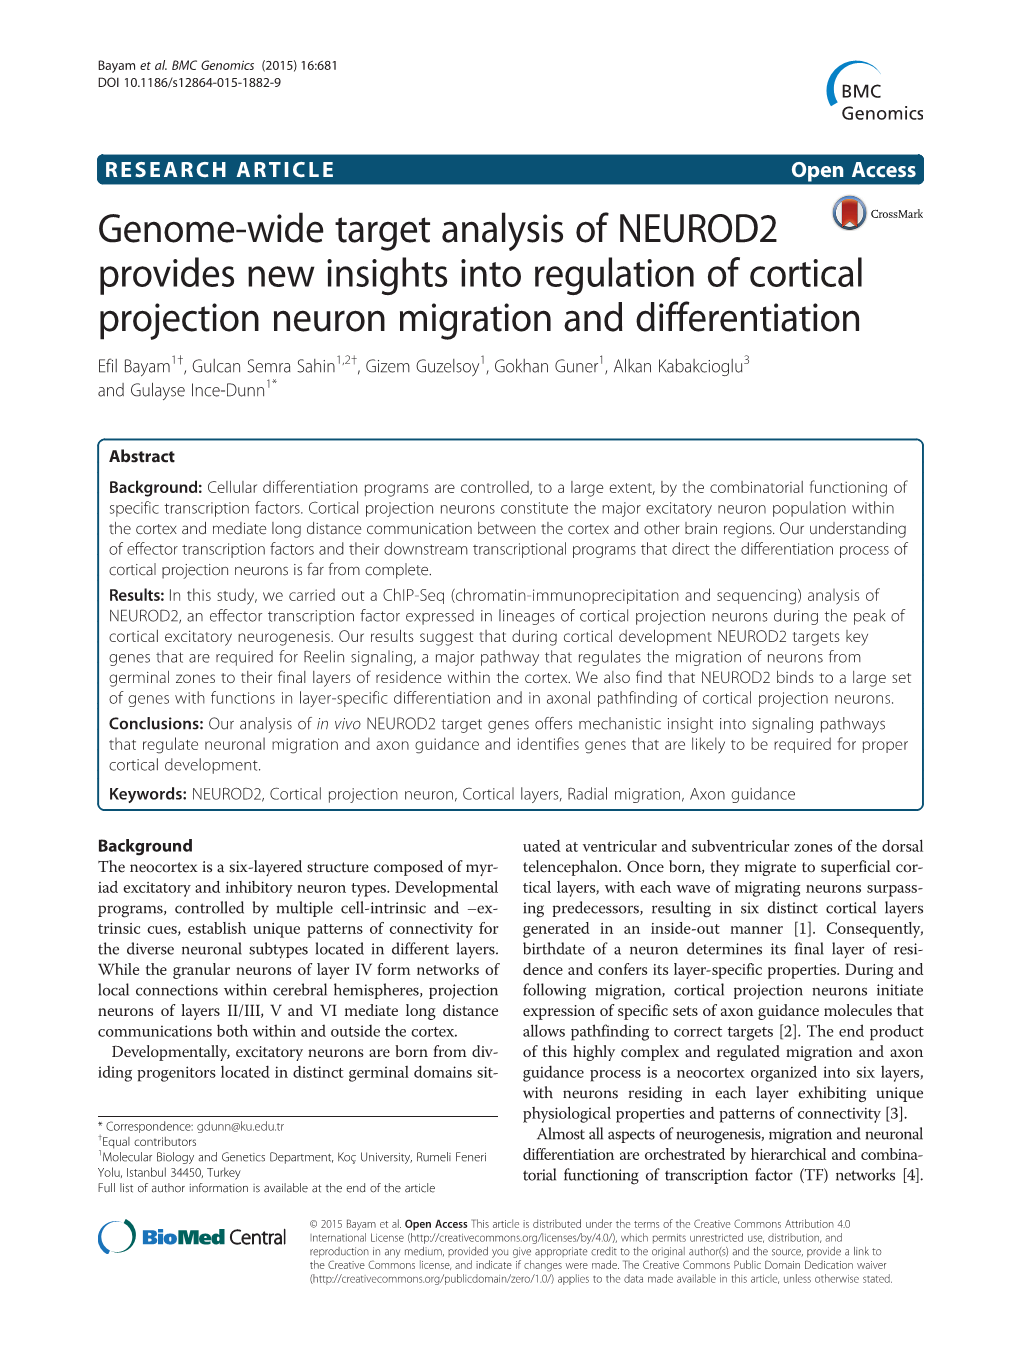 Genome-Wide Target Analysis of NEUROD2 Provides New Insights Into Regulation of Cortical Projection Neuron Migration and Differe